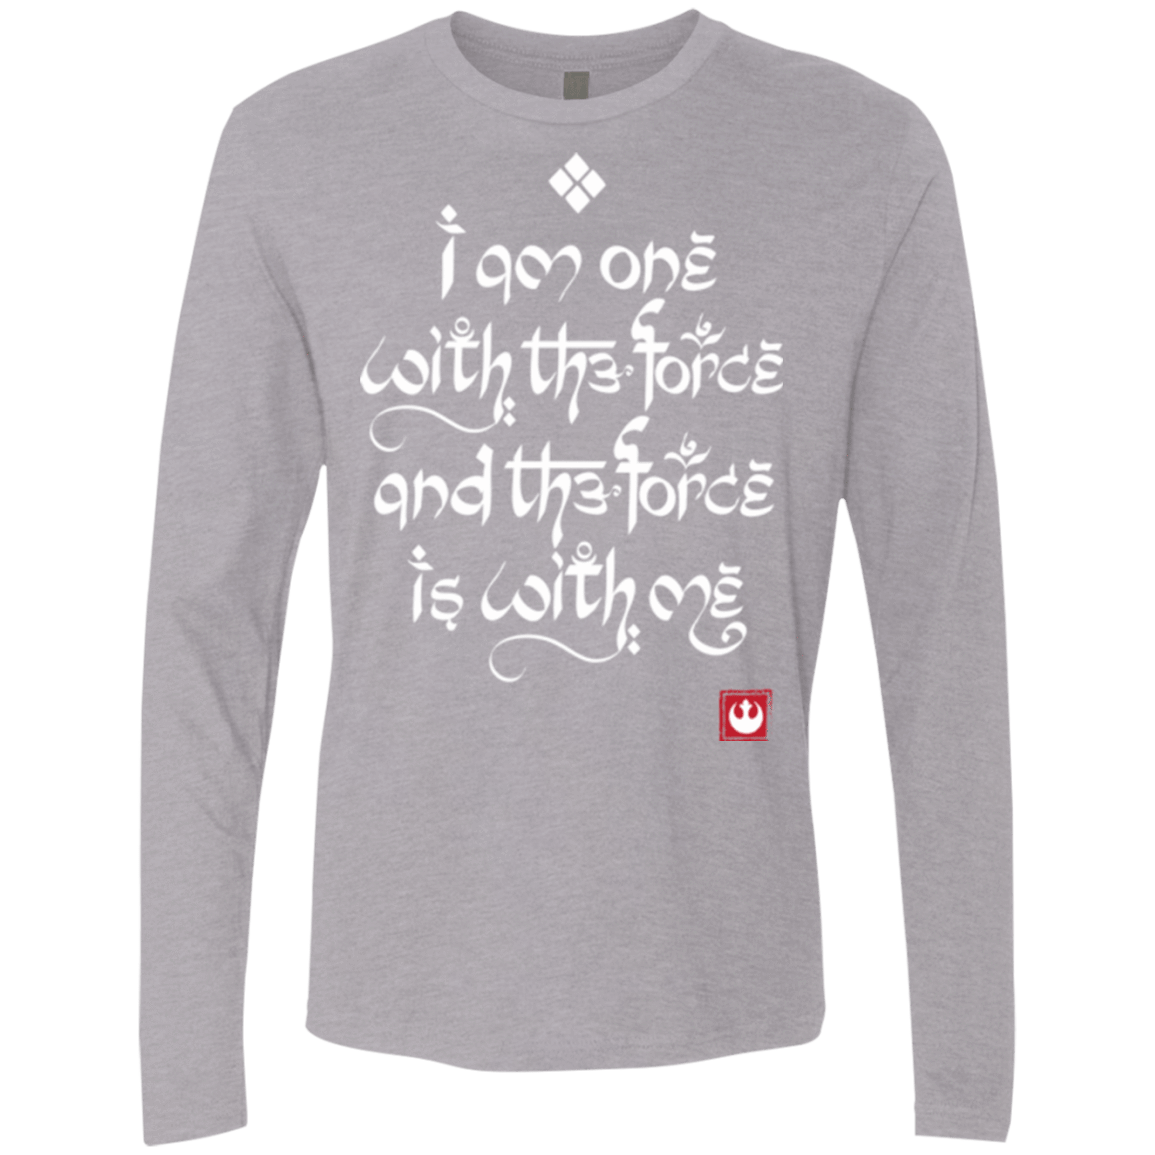 T-Shirts Heather Grey / Small Force Mantra White Men's Premium Long Sleeve